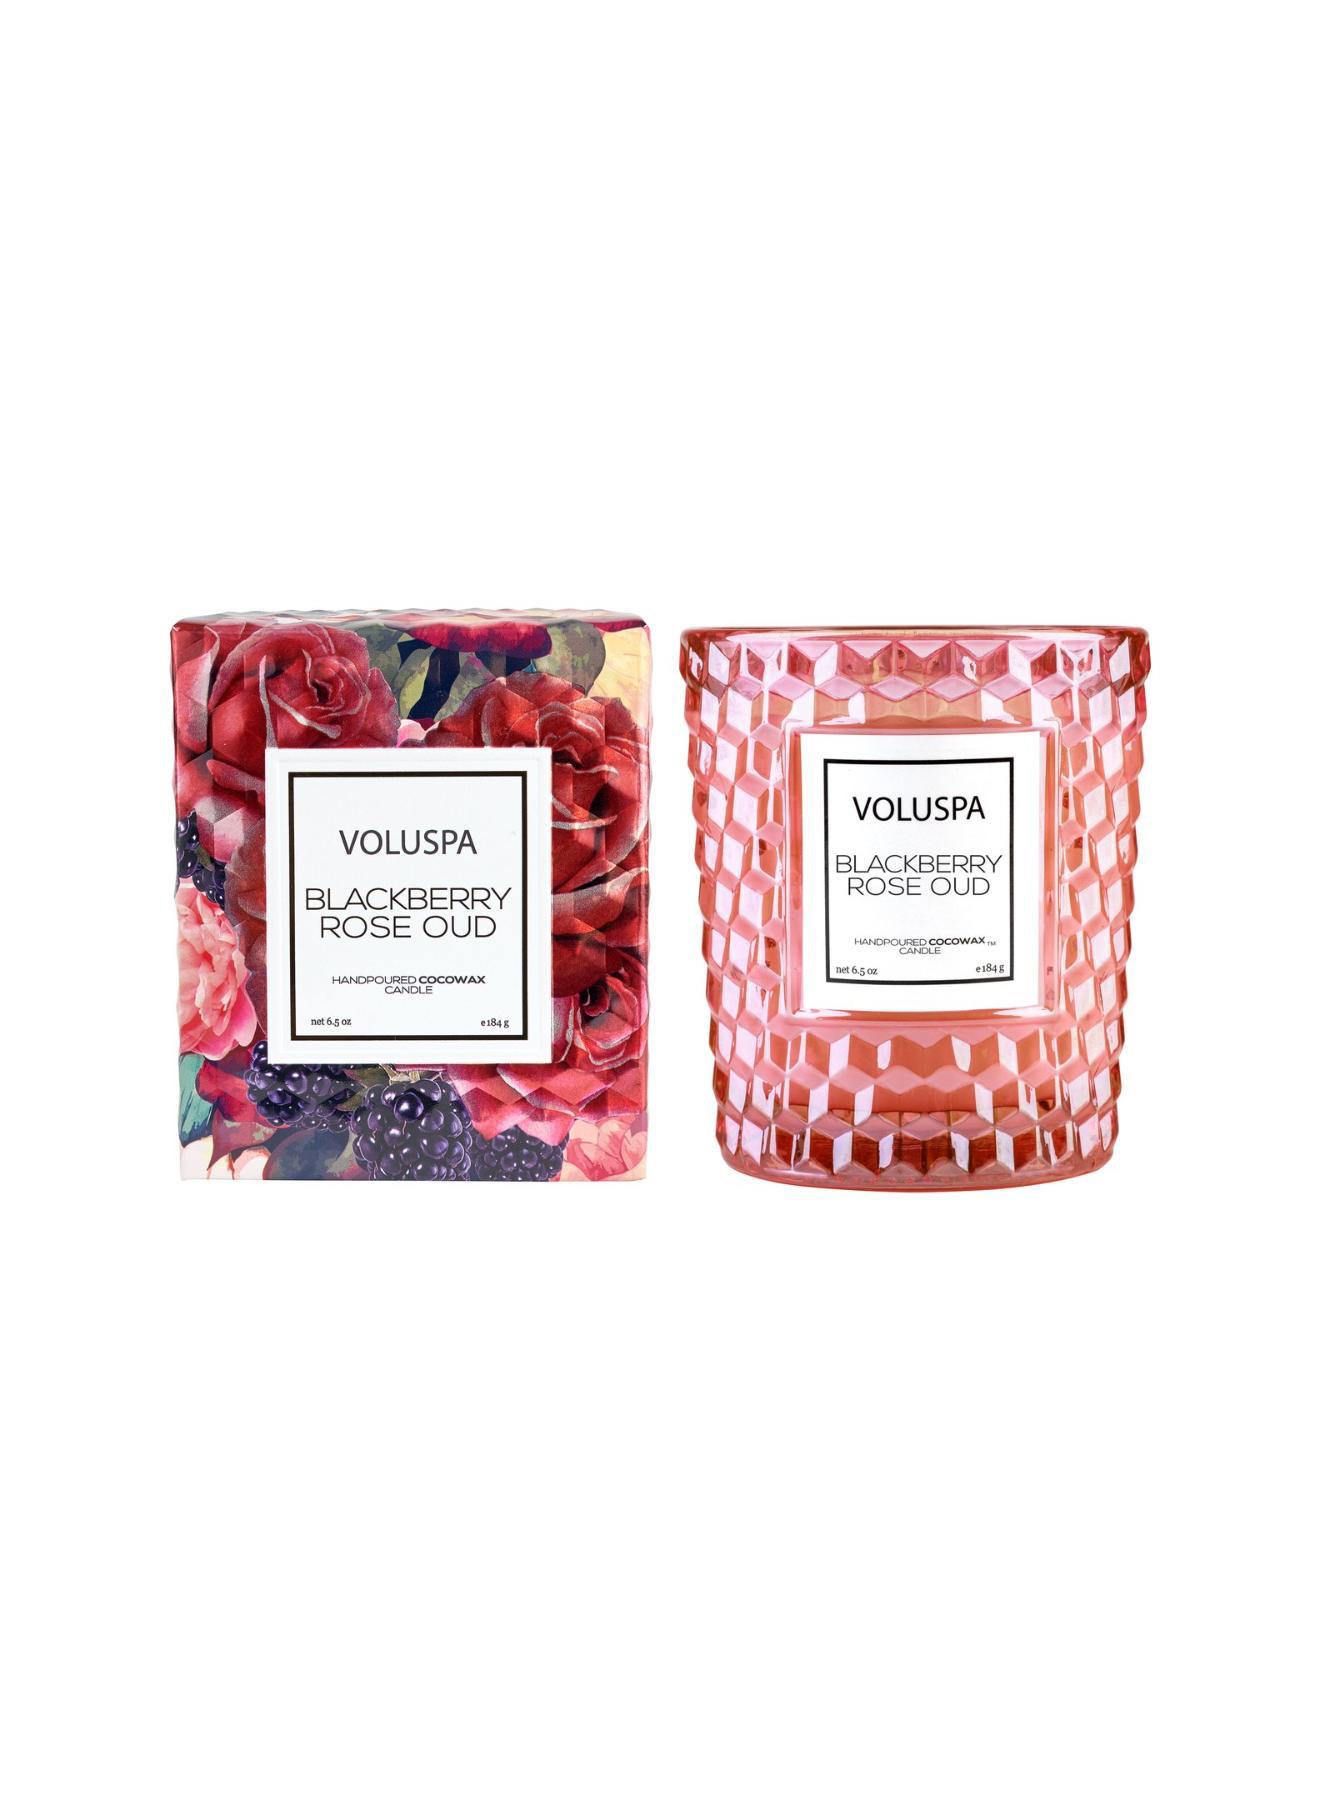 Blackberry rose oud classic candle - 2